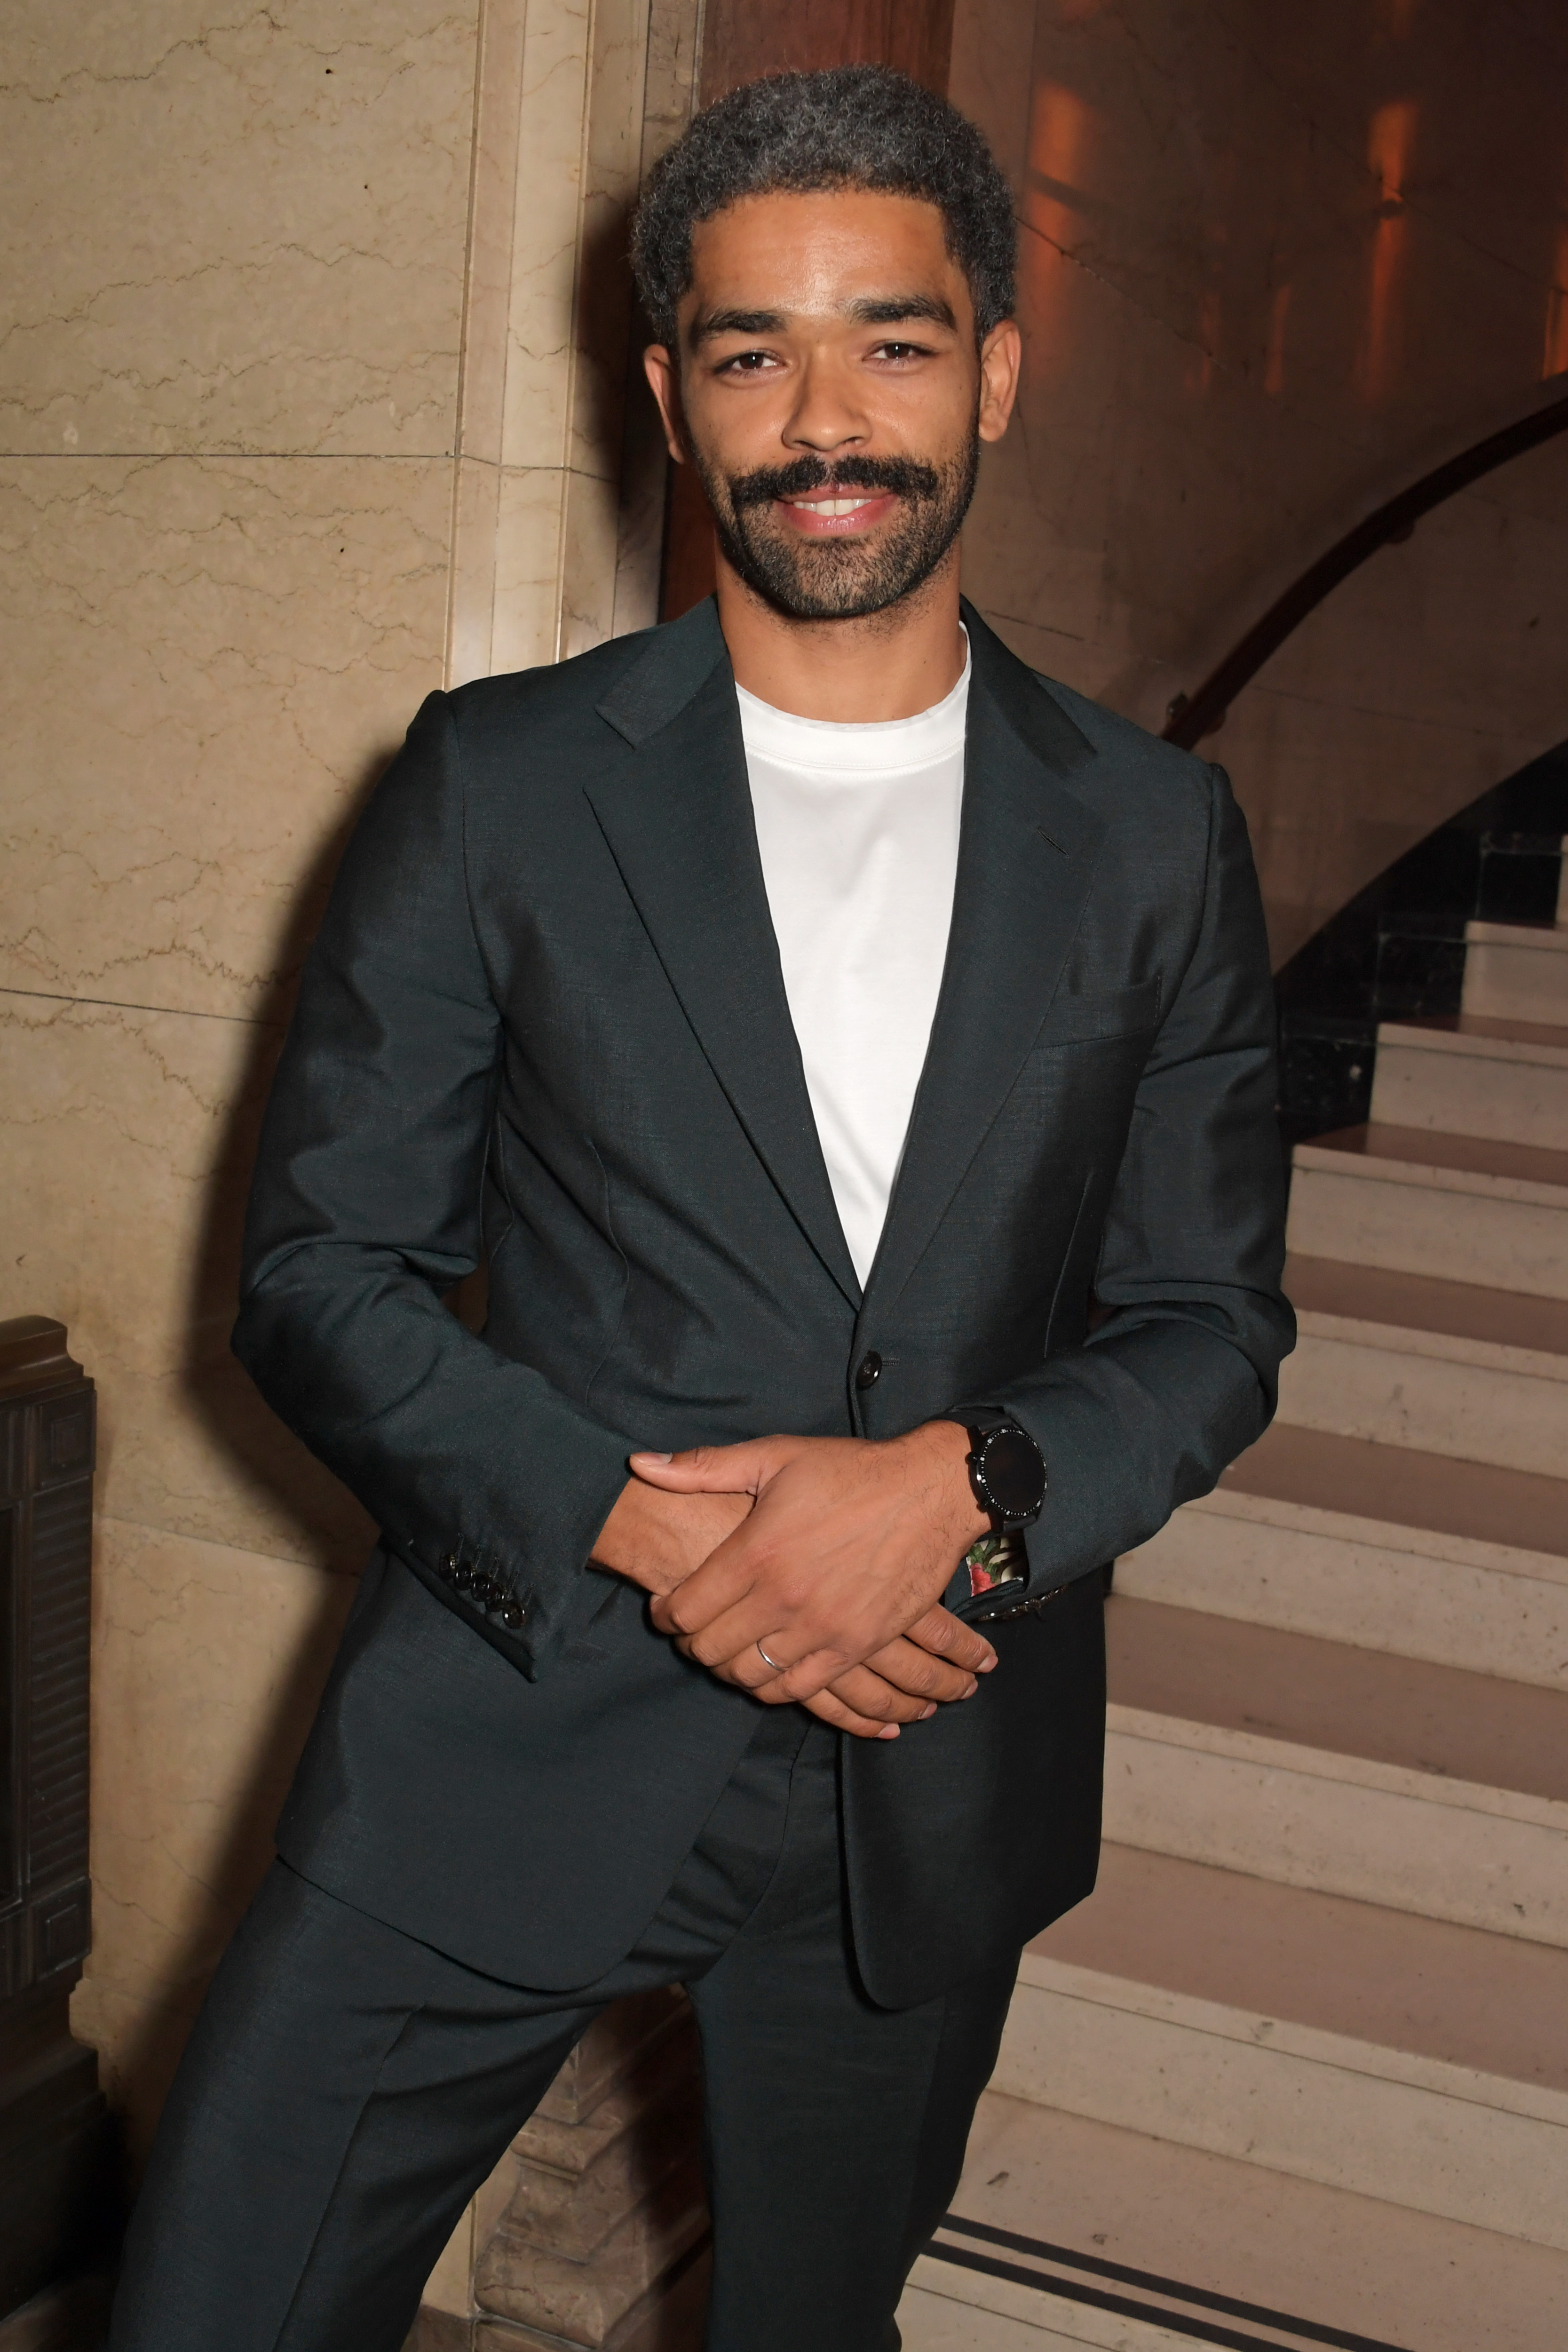 Kingsley Ben-Adir during the 65th BFI London Film Festival at Freemasons Hall on October 6, 2021, in London, England. | Source: Getty Images